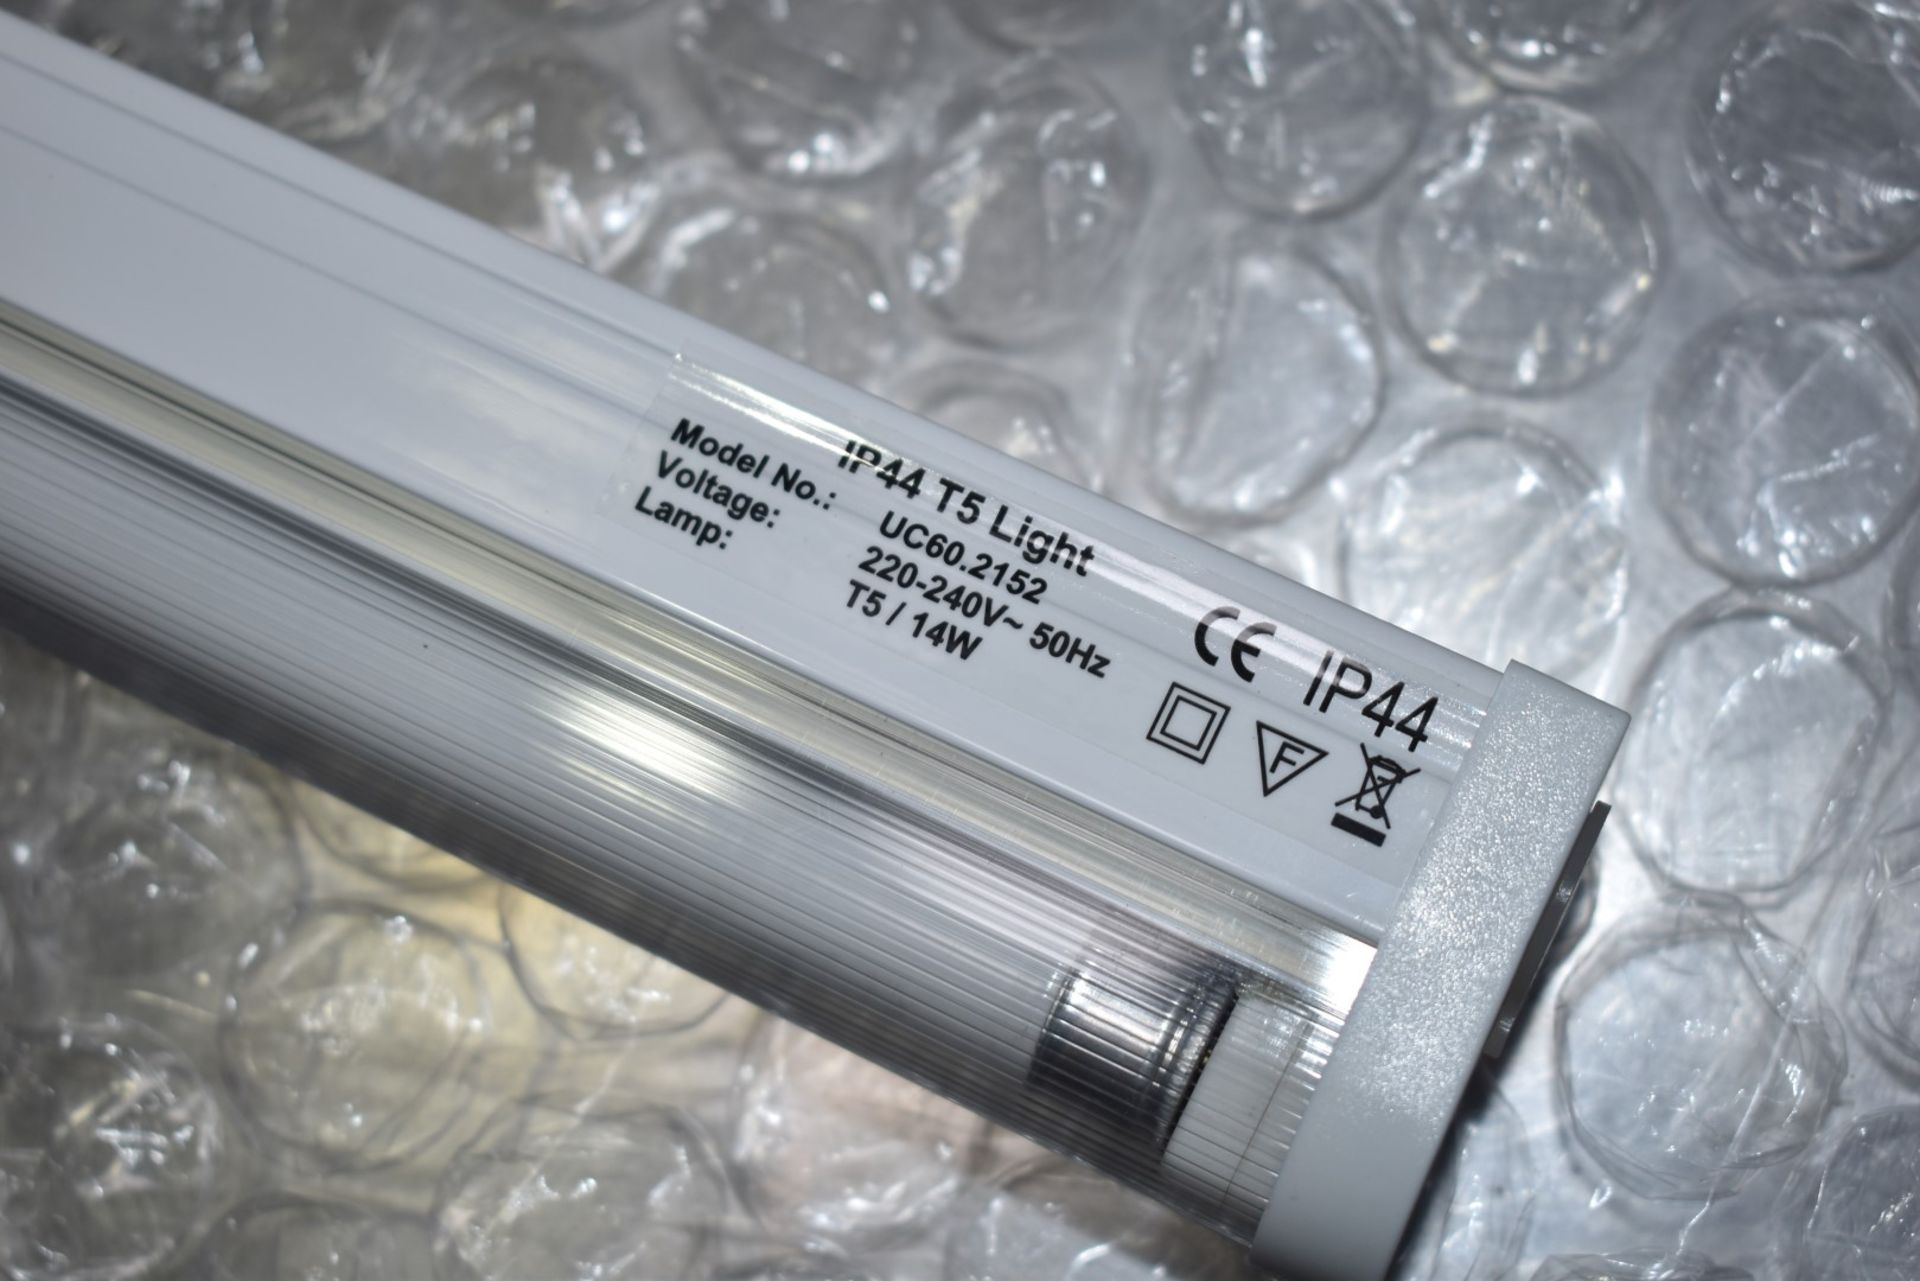 1 x Bathroom Light Fitting - IP44 Waterproof T5 14w Fluorescent Lights With Built-In Electronic - Image 5 of 11